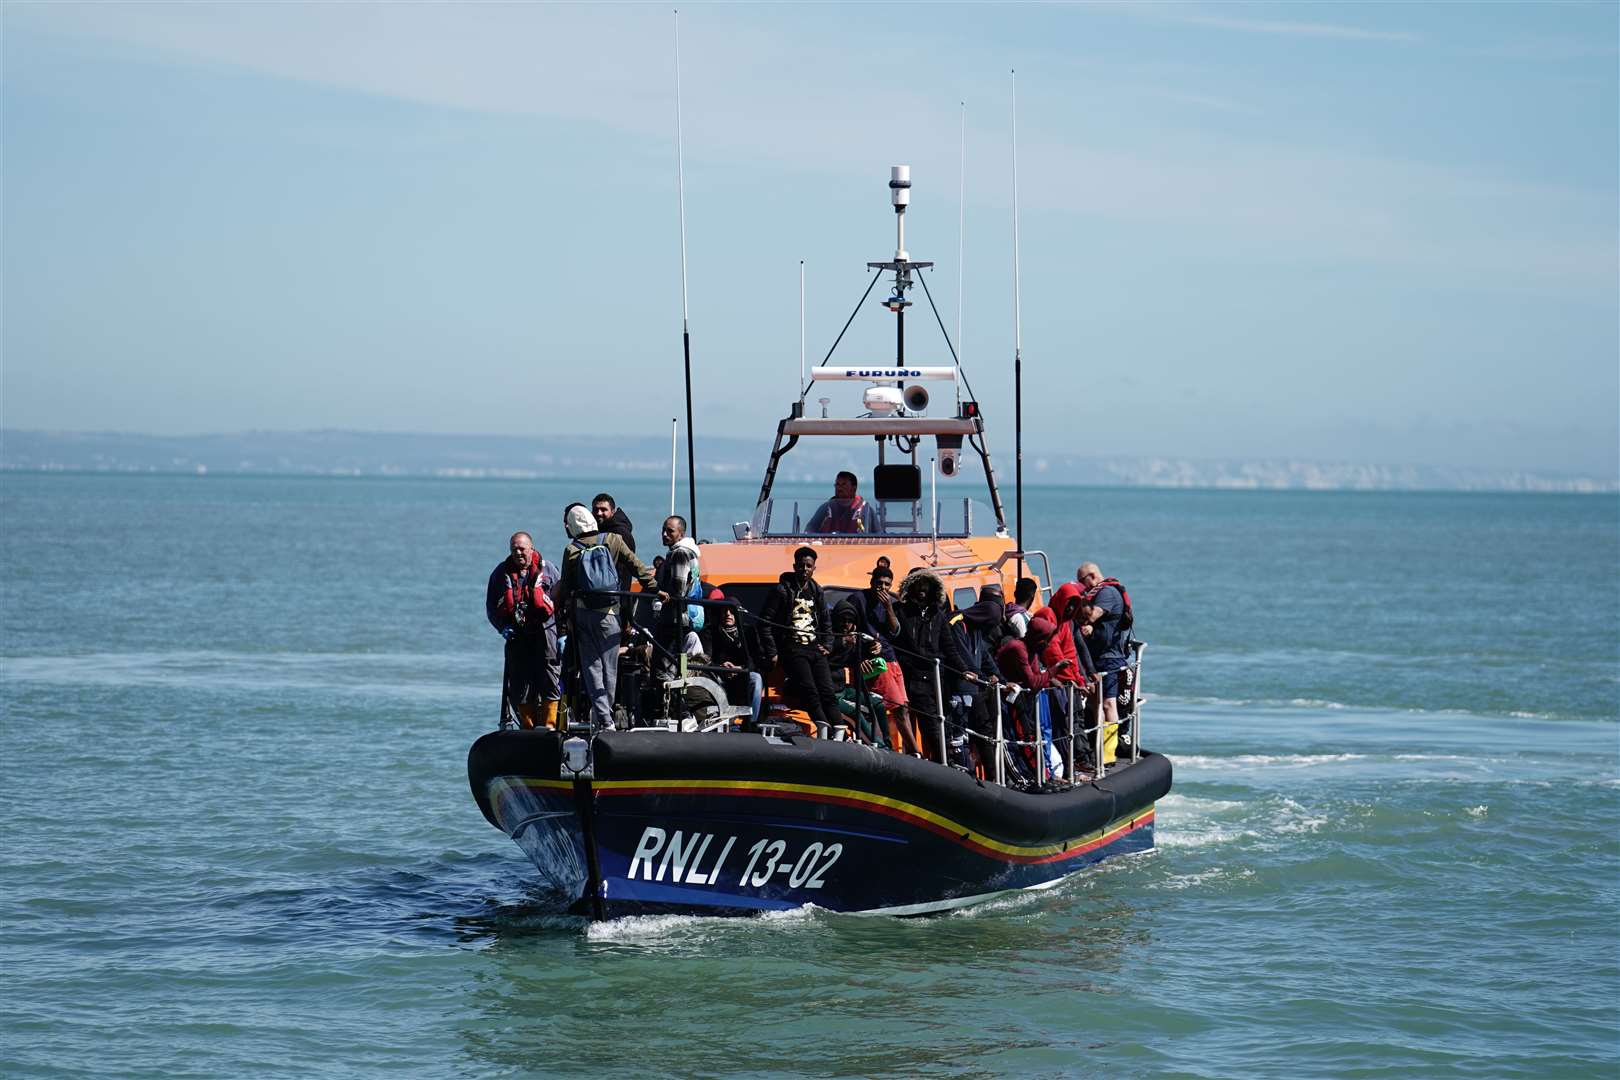 The RNLI’s Dungeness lifeboat heads to shore with people thought to be migrants on Wednesday (Jordan Pettitt/PA)